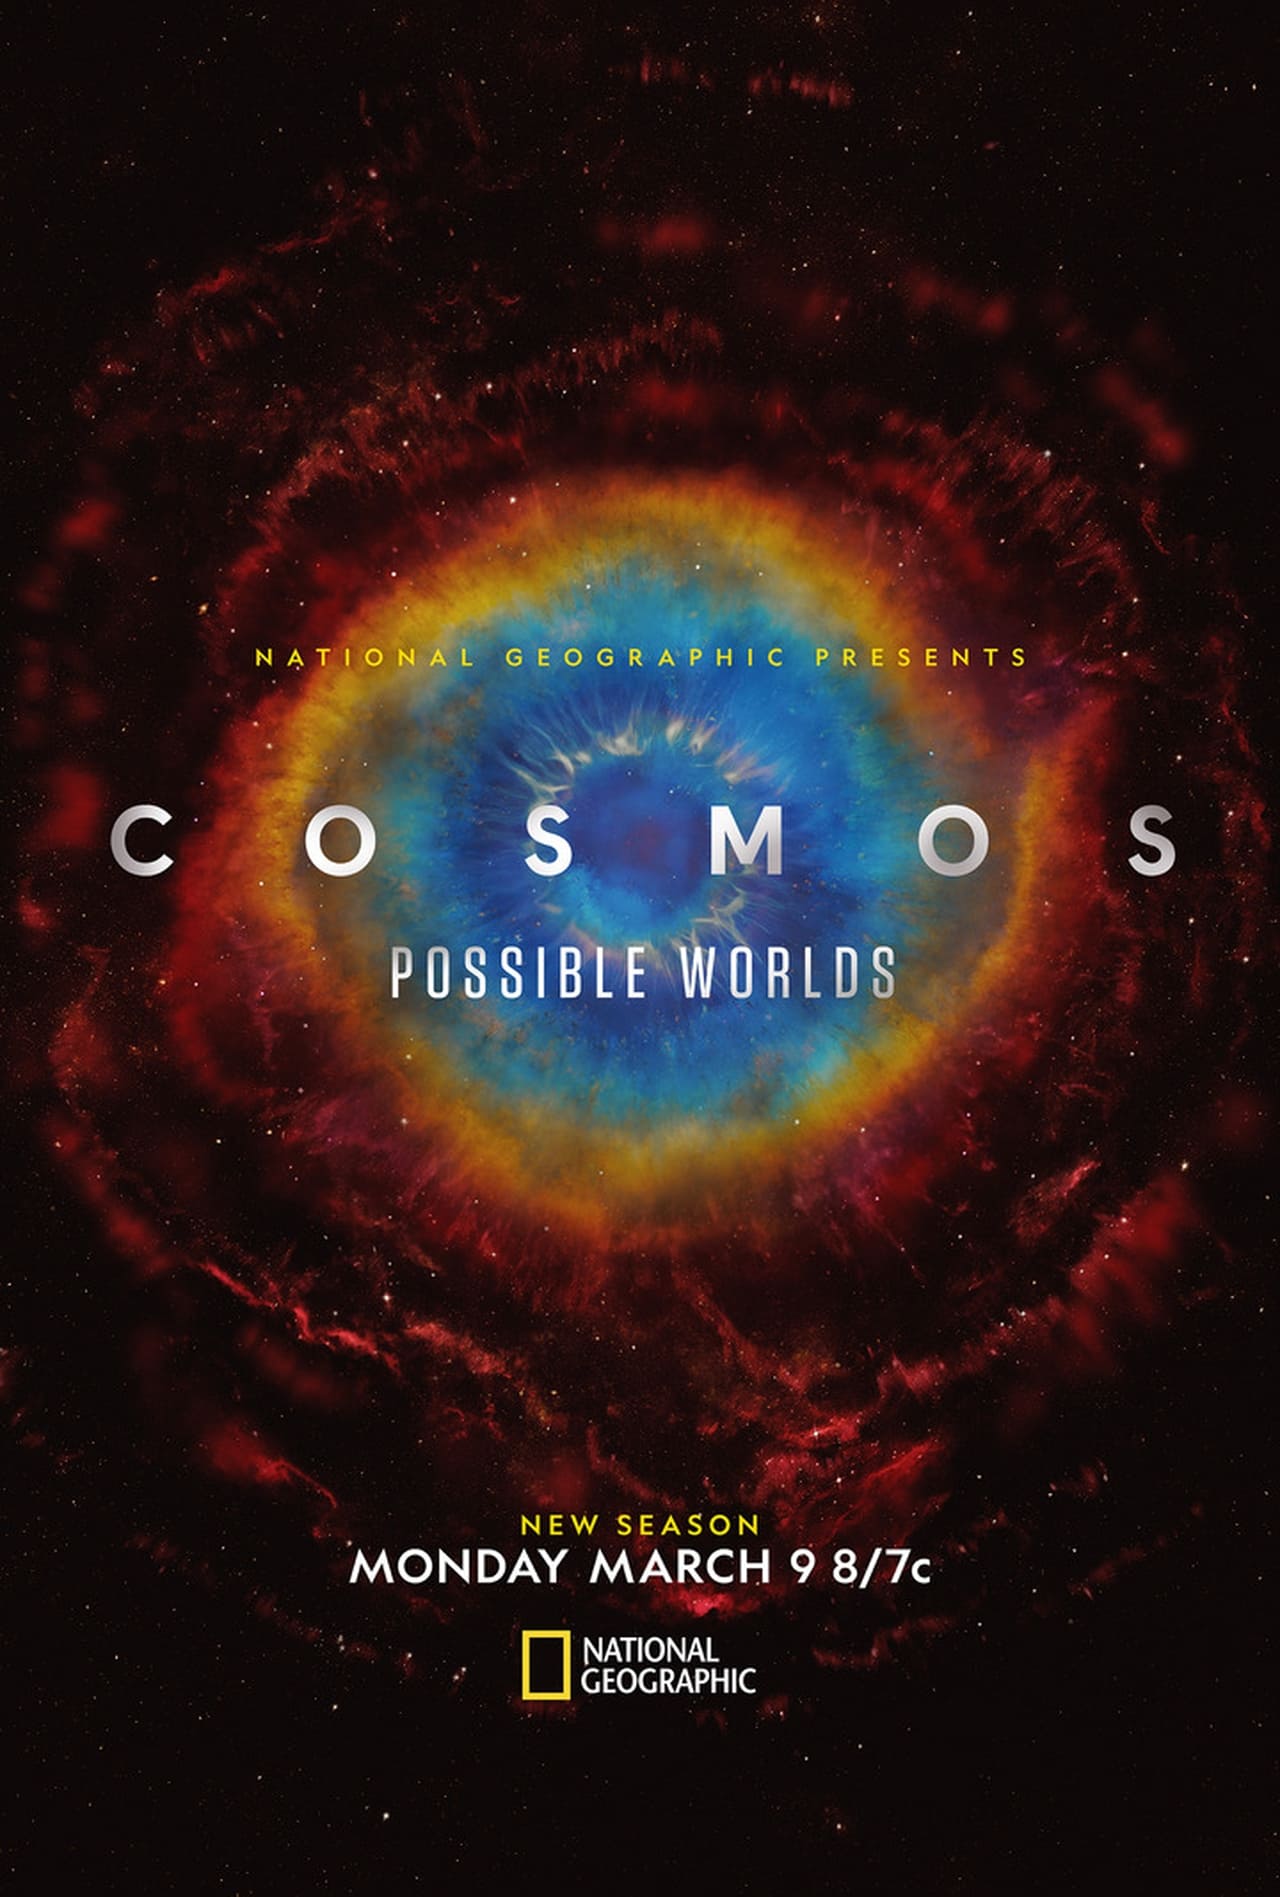 Cosmos: Possible Worlds (2020) S1 EP01&EP13 128Kbps 23.976Fps 48Khz 2.0Ch Disney+ DD+ E-AC3 Turkish Audio TAC